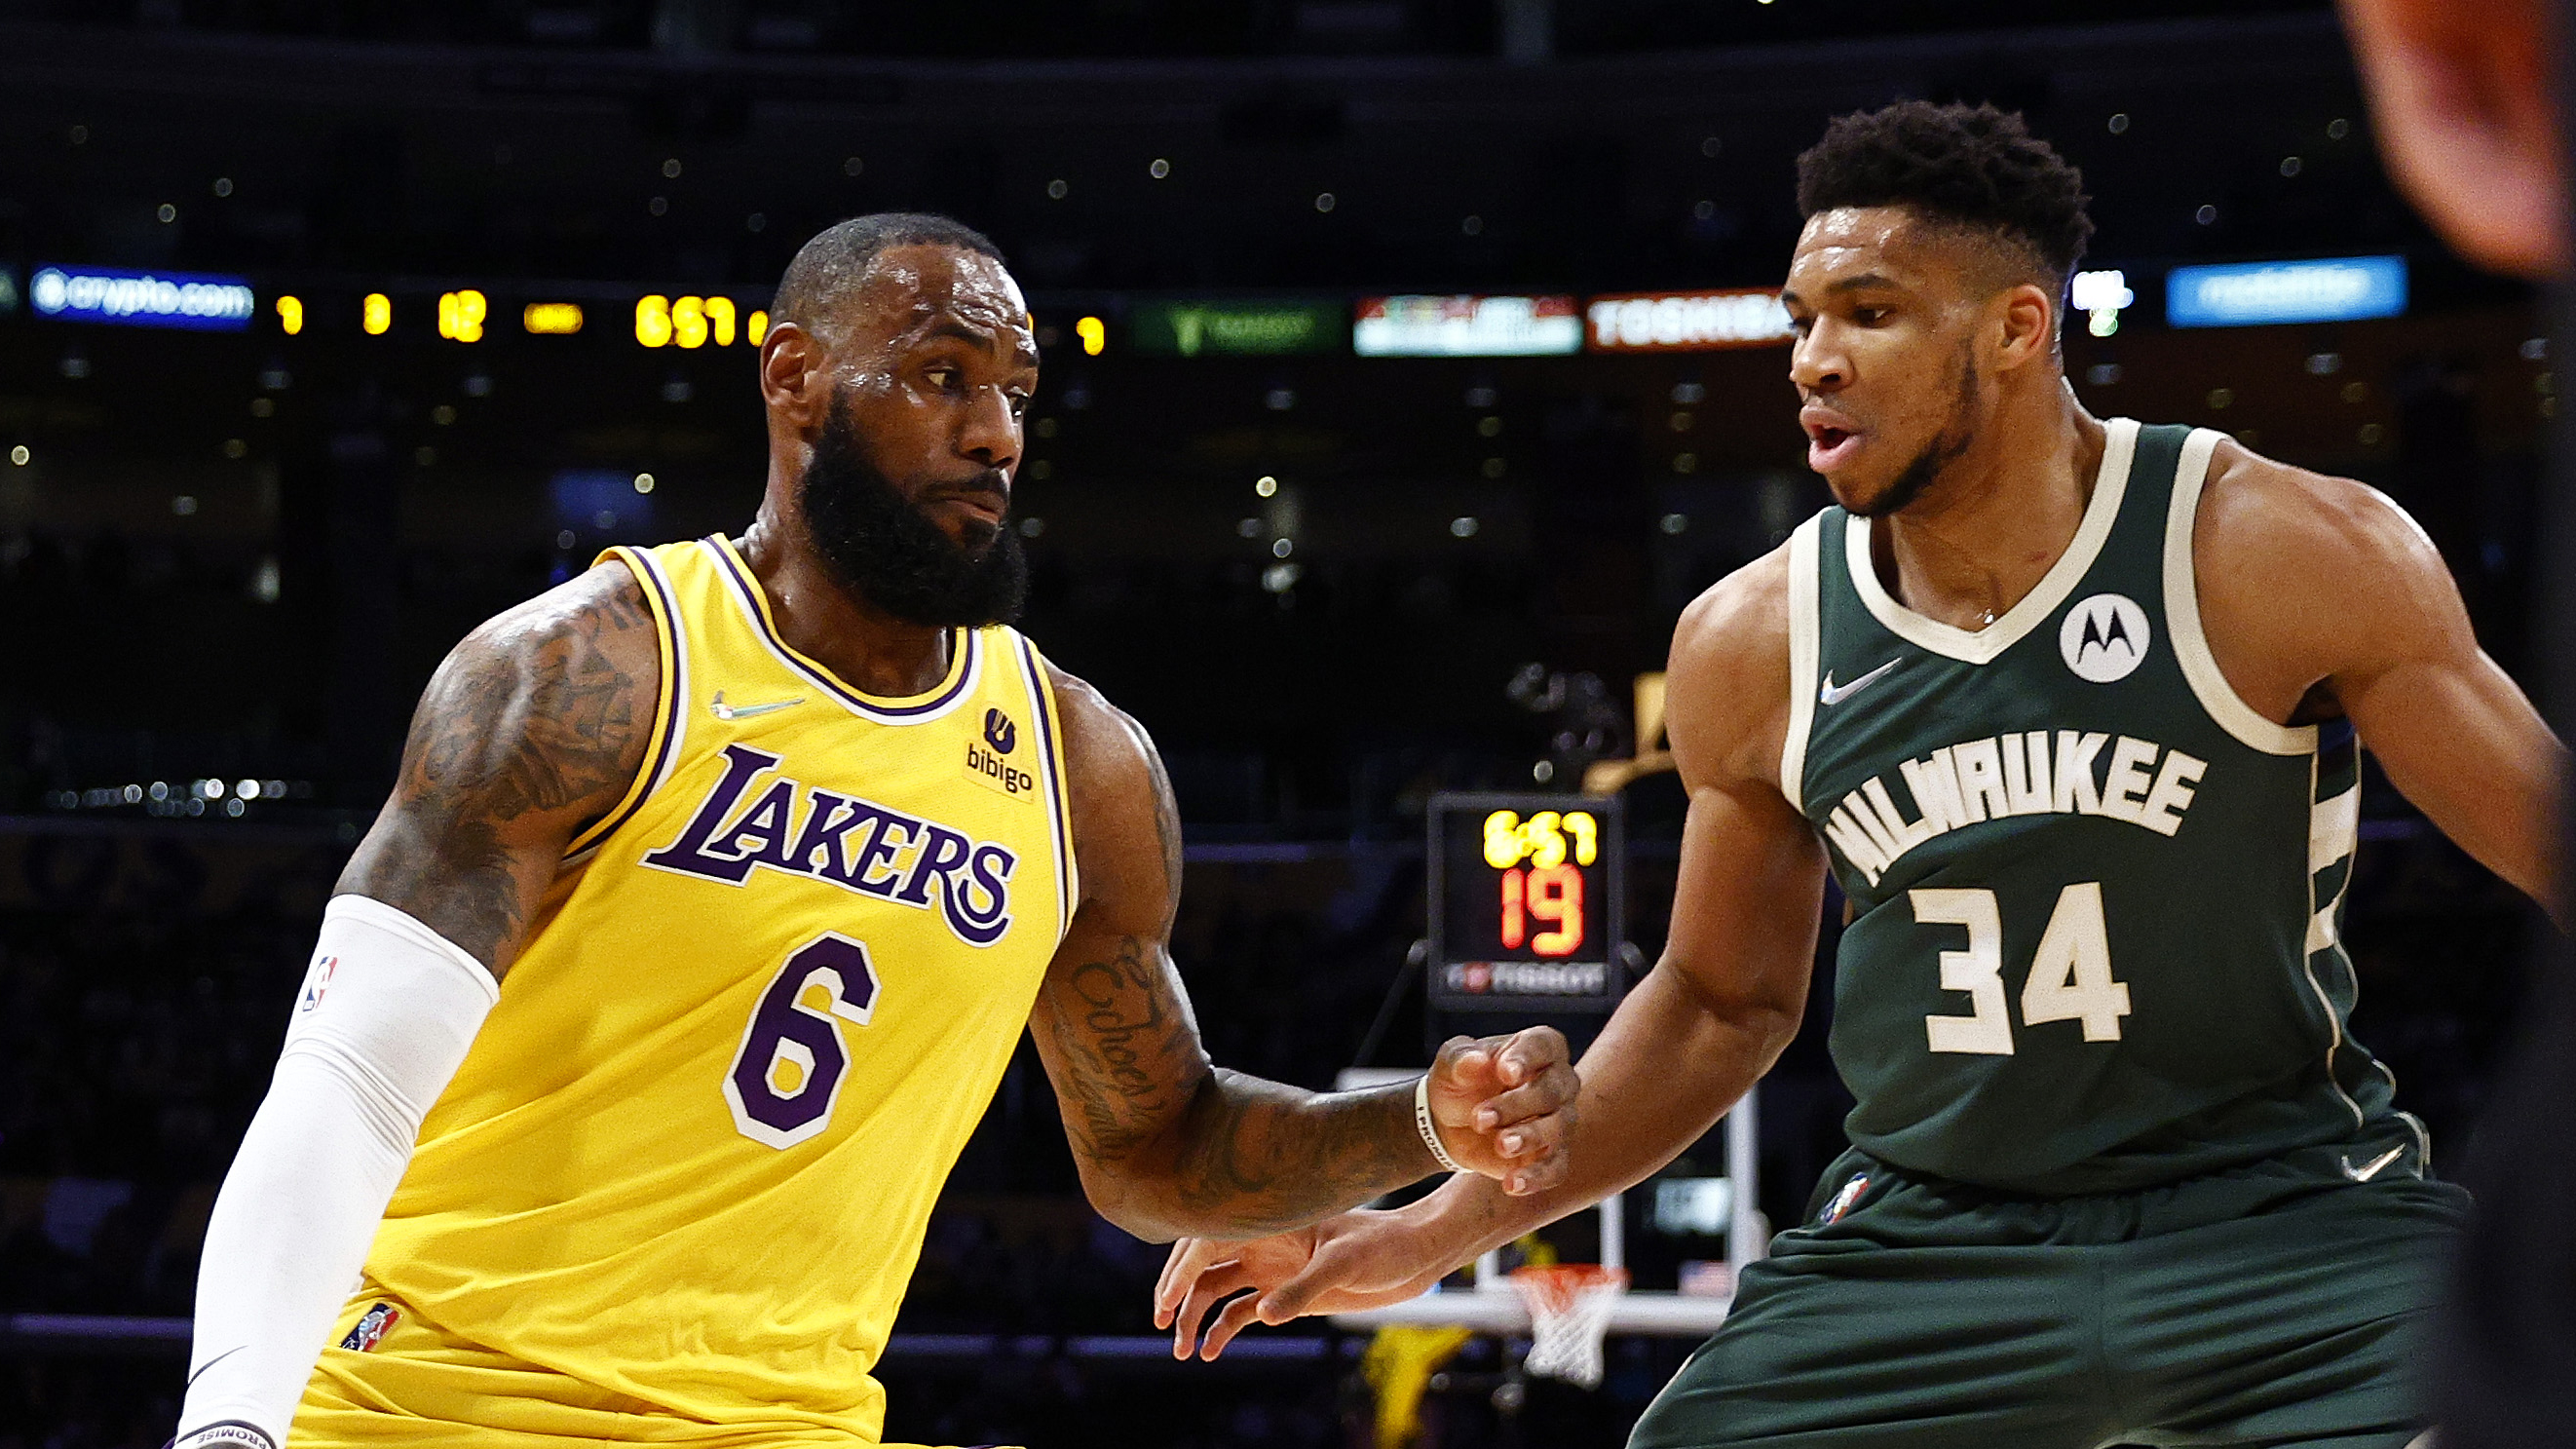 NBA All-Star Game 2023 live stream: How to watch Team LeBron vs Team Giannis online